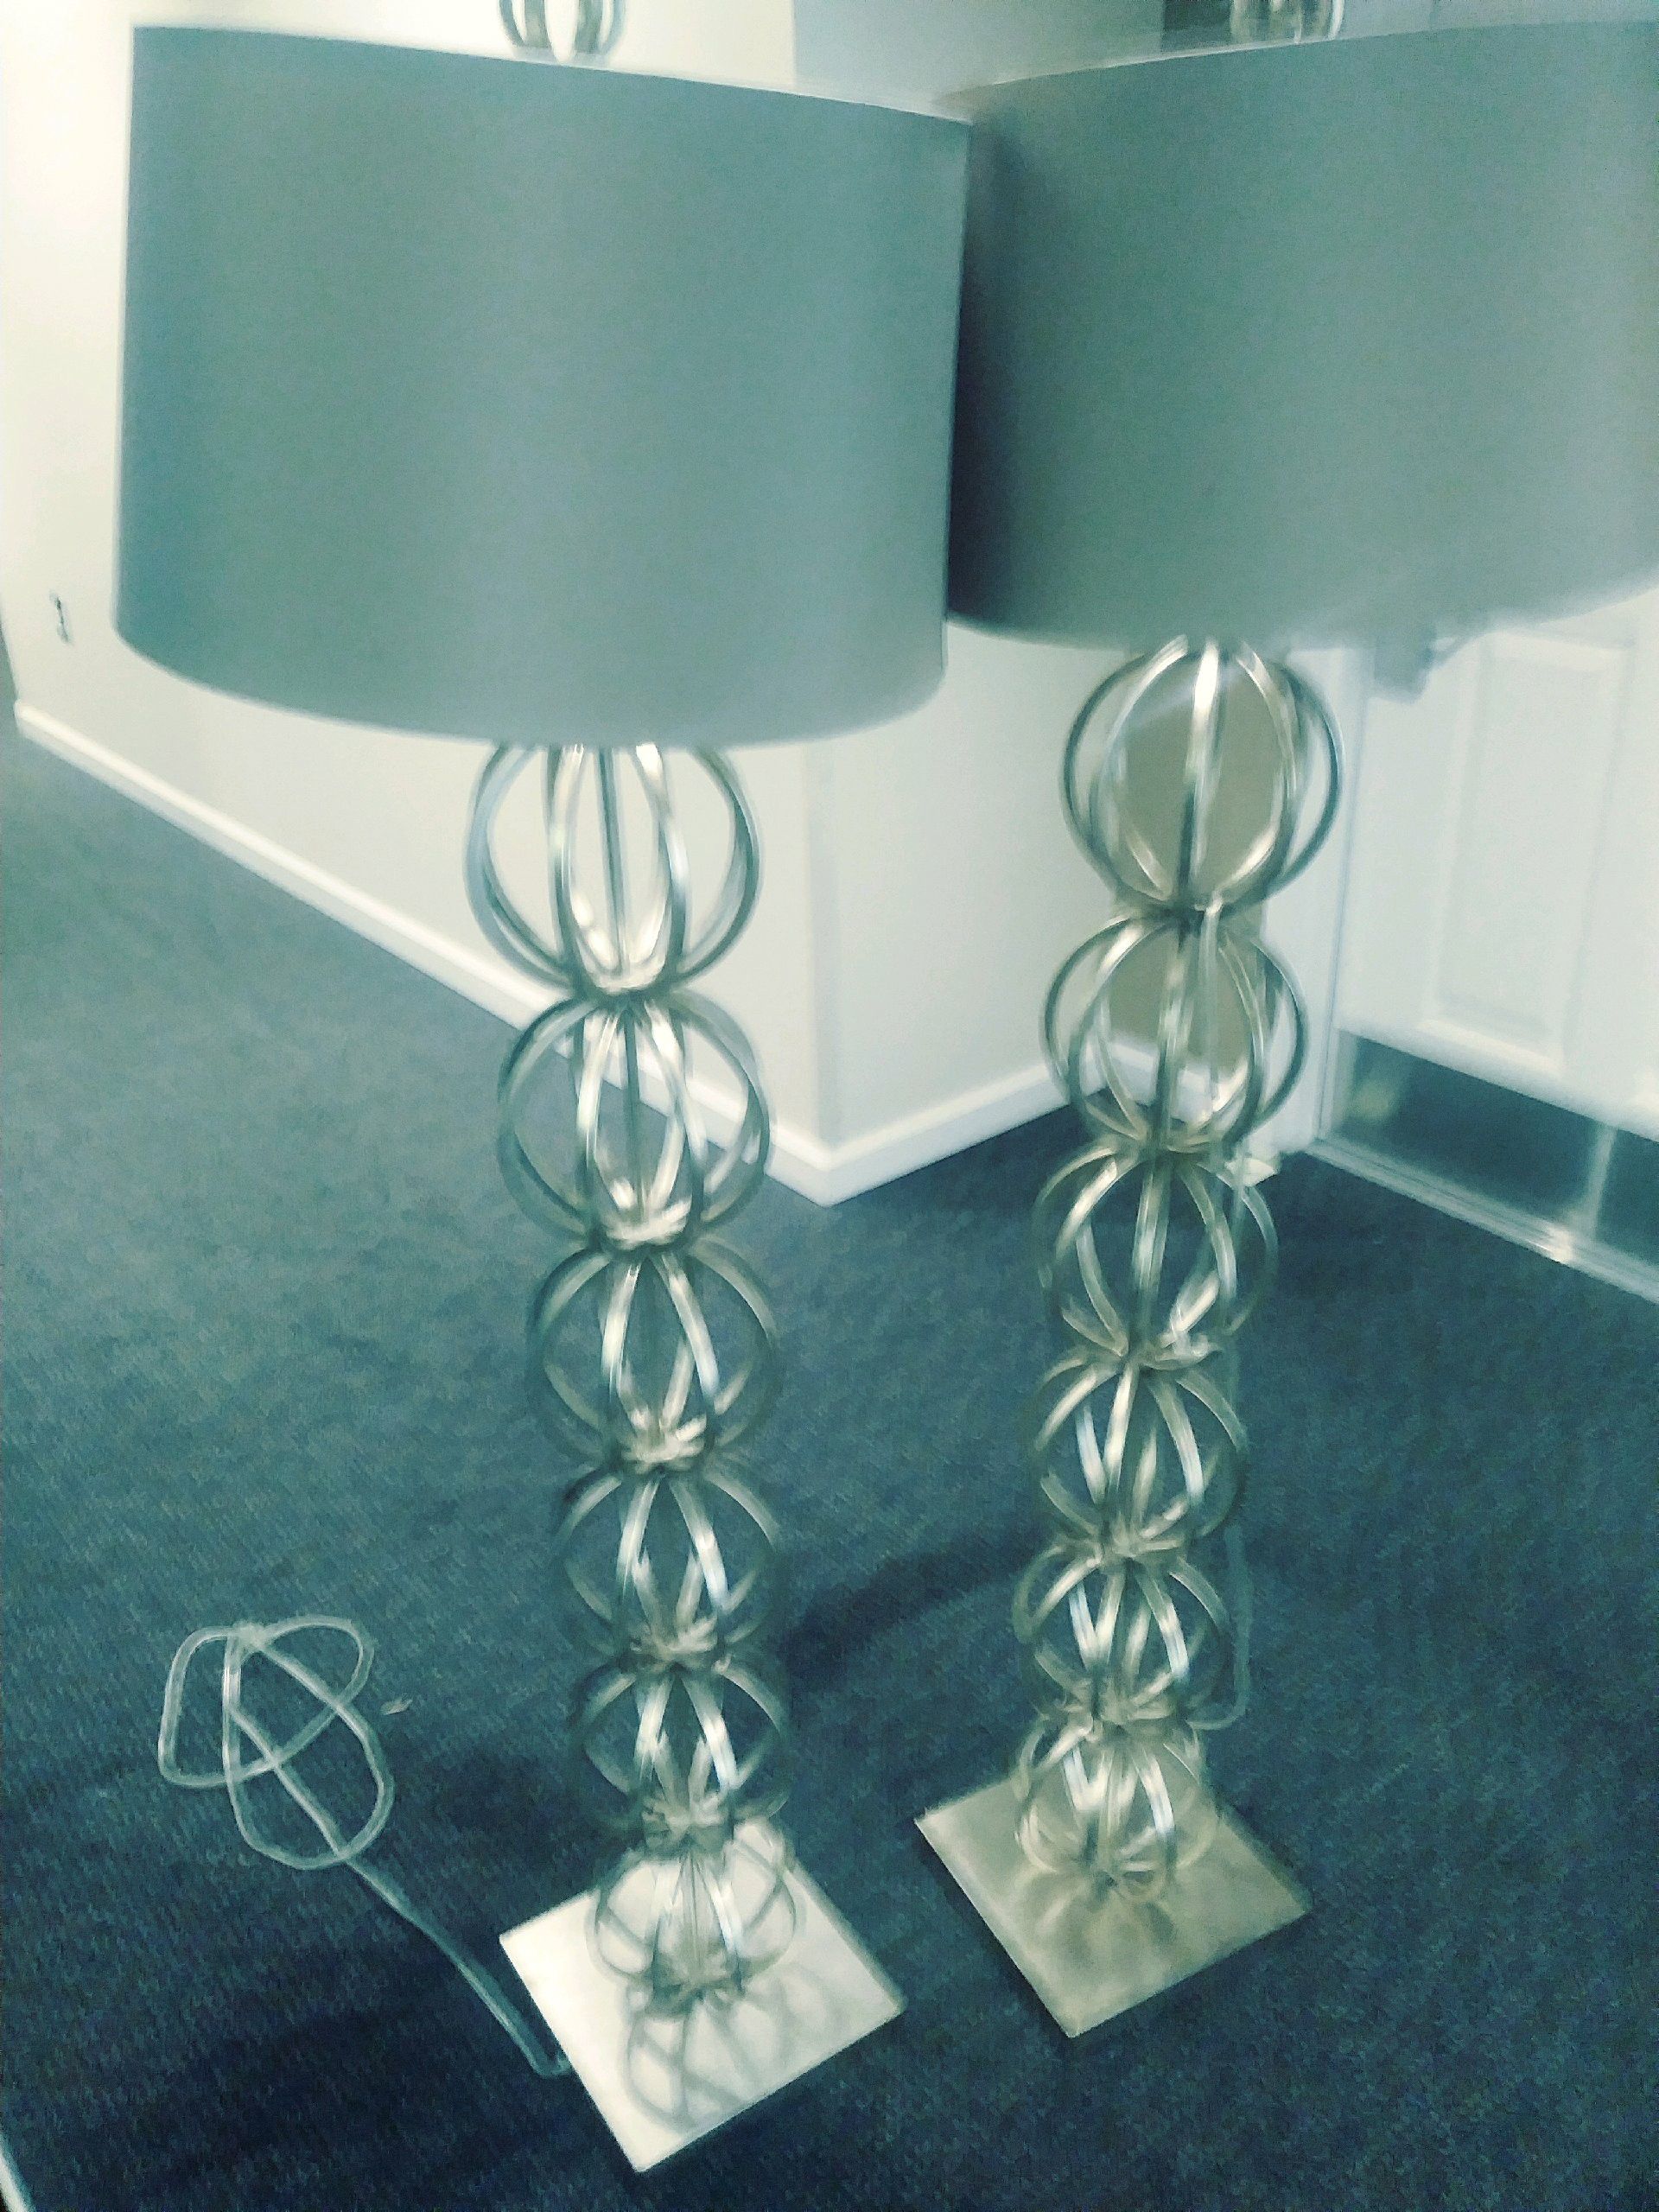 Brass floor lamps with grey shades